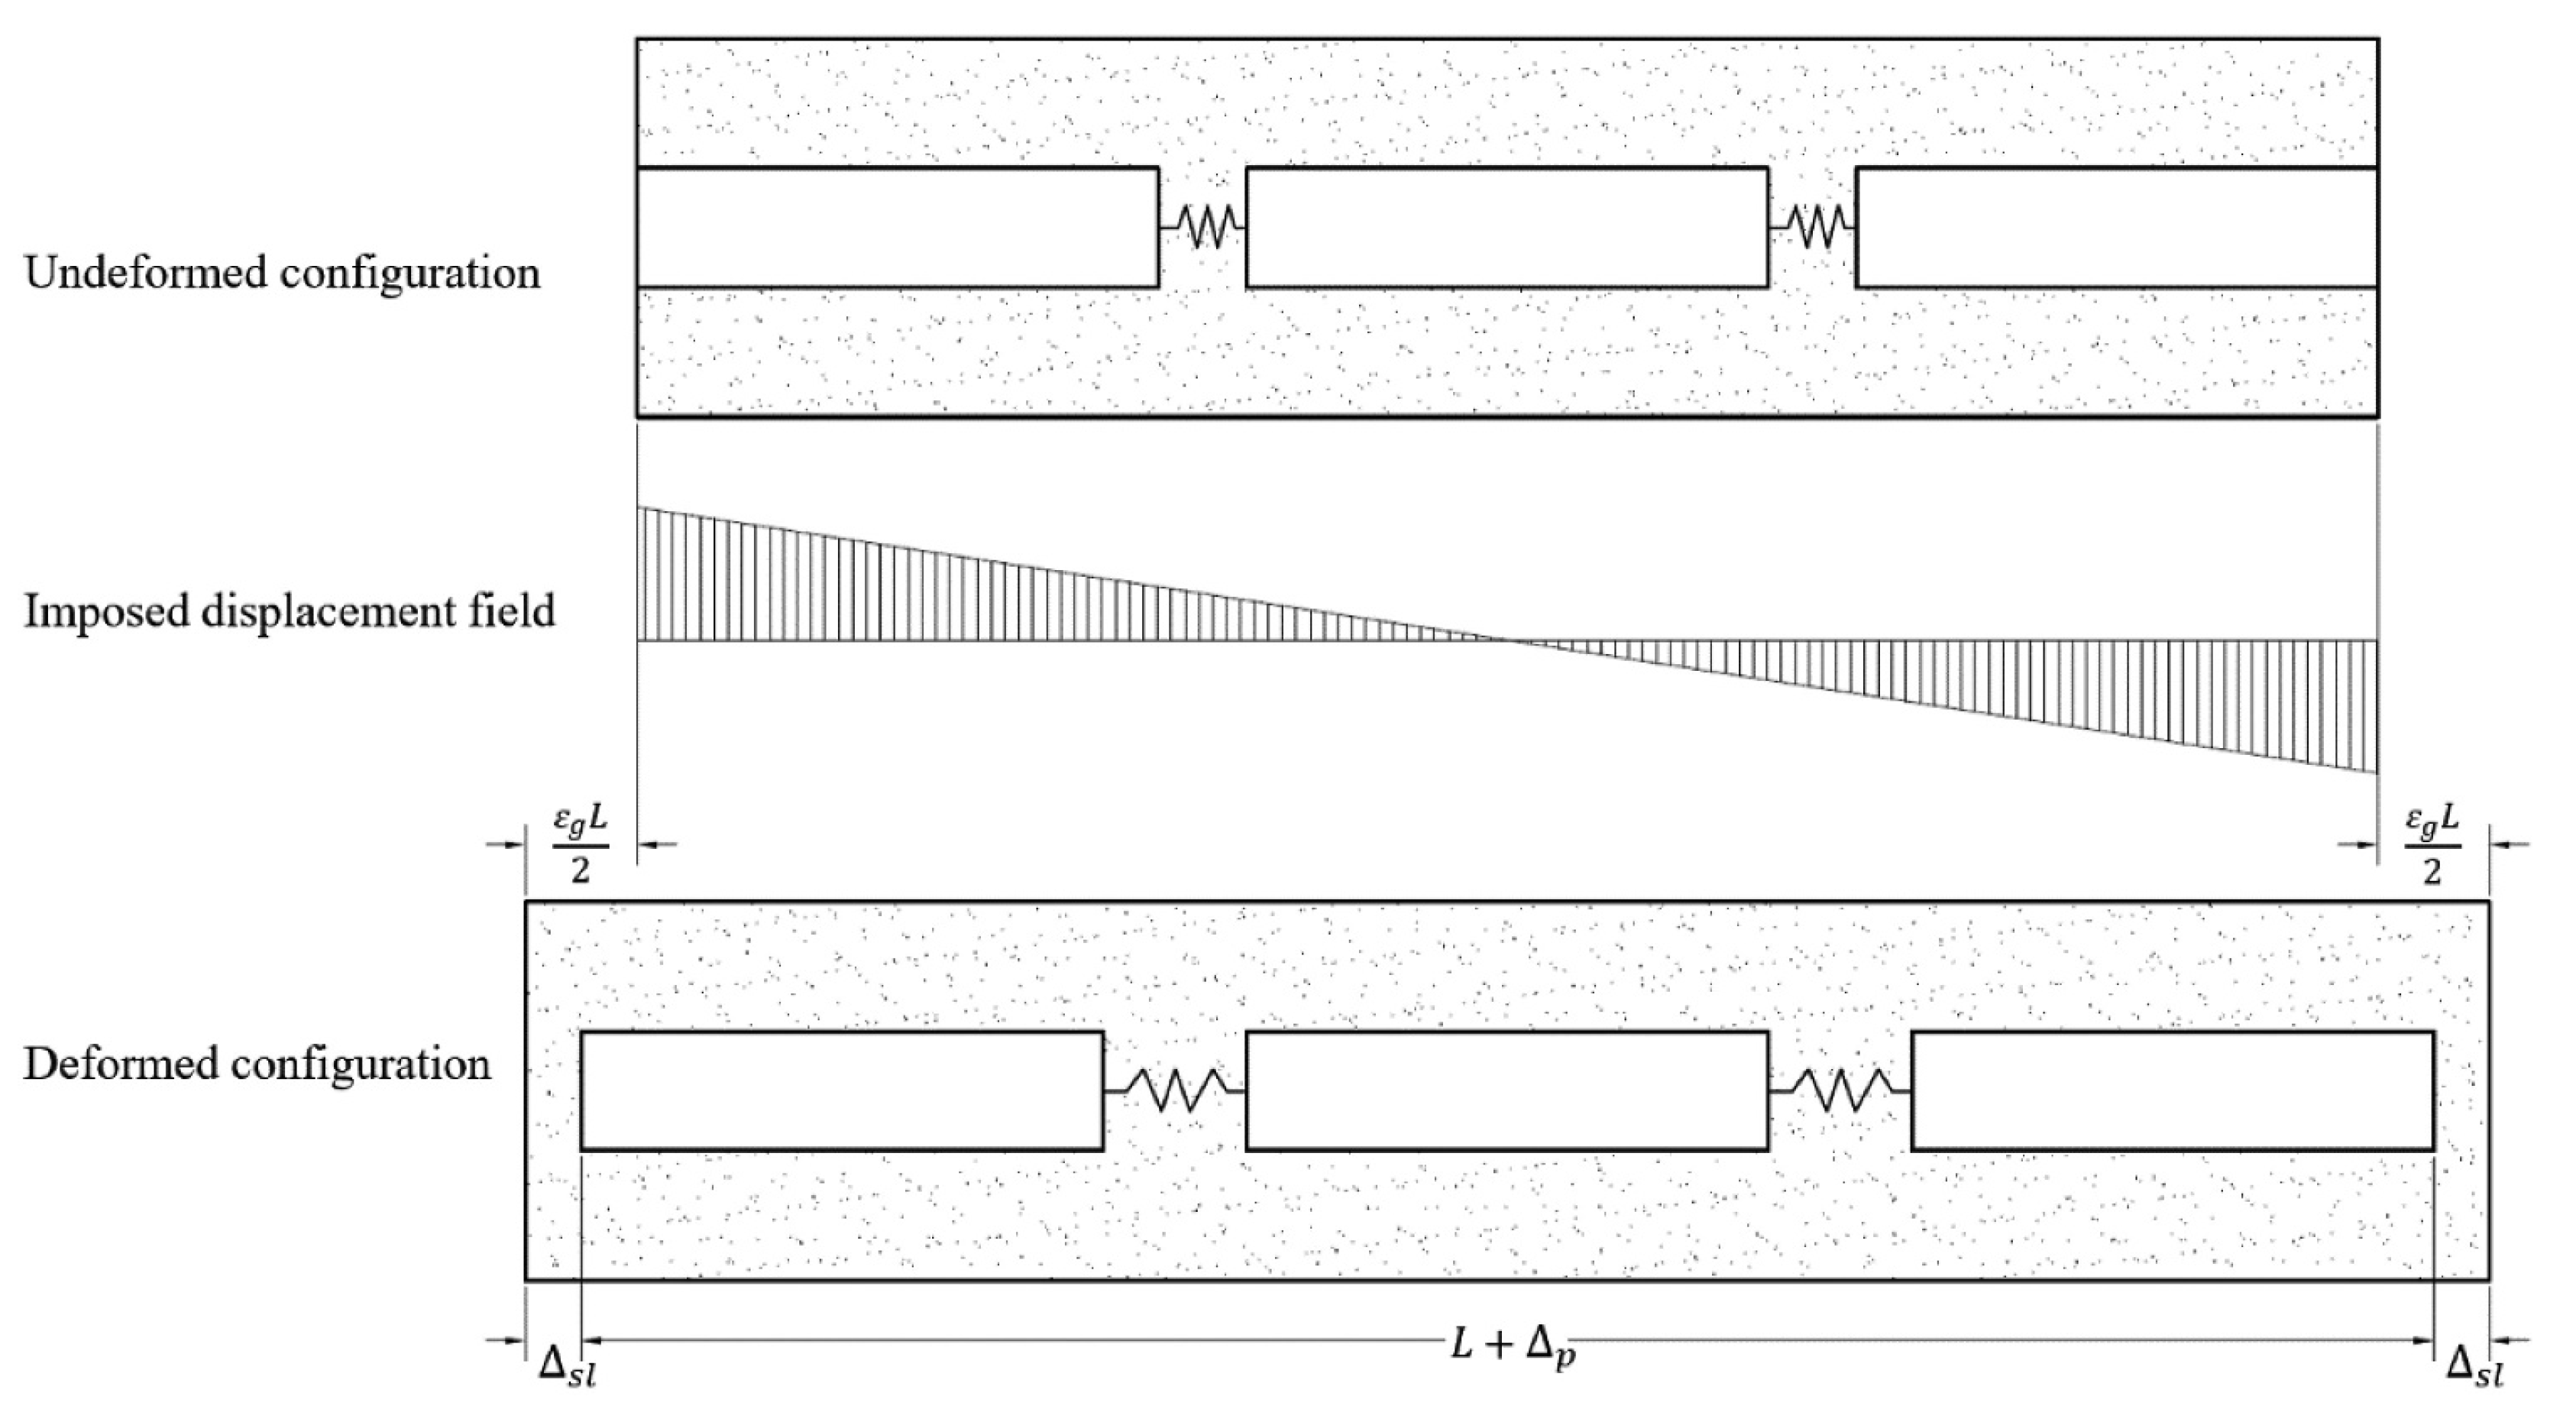 Simplified model of pipeline subject to seismic wave